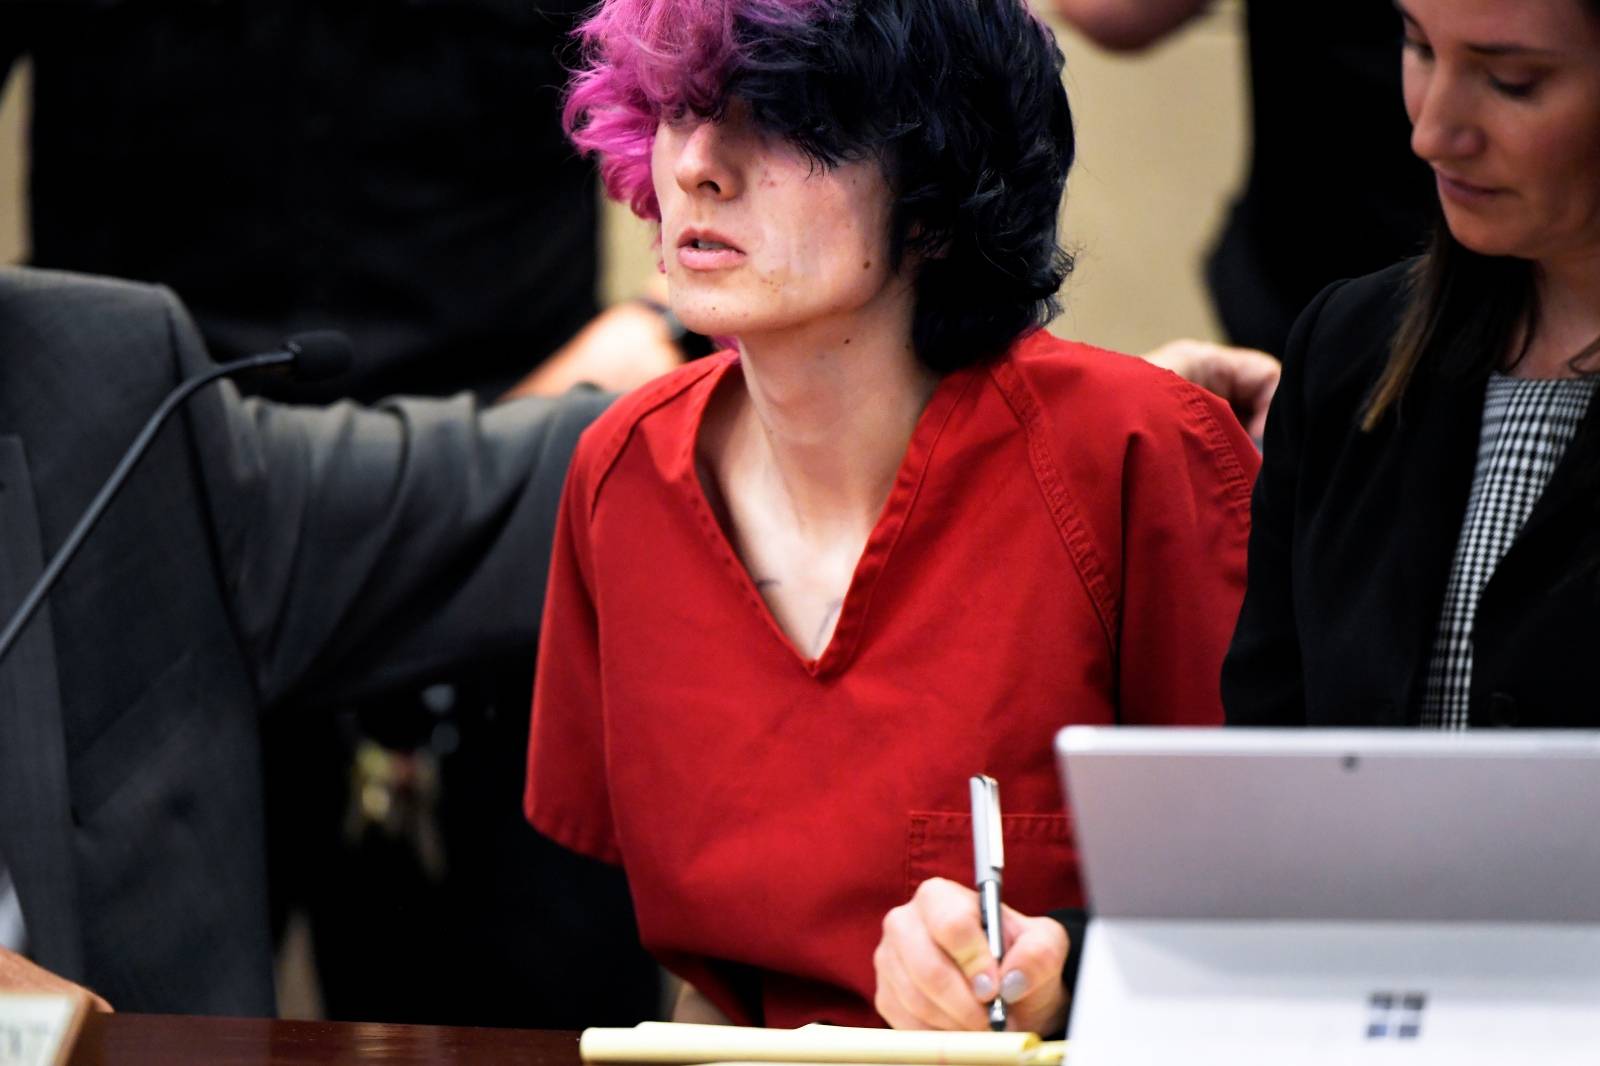 Devon Erickson, 18, accused of taking part in a deadly school shooting, appears at the Douglas County Courthouse where he faces murder and attempted murder charges, in Castle Rock, Colorado